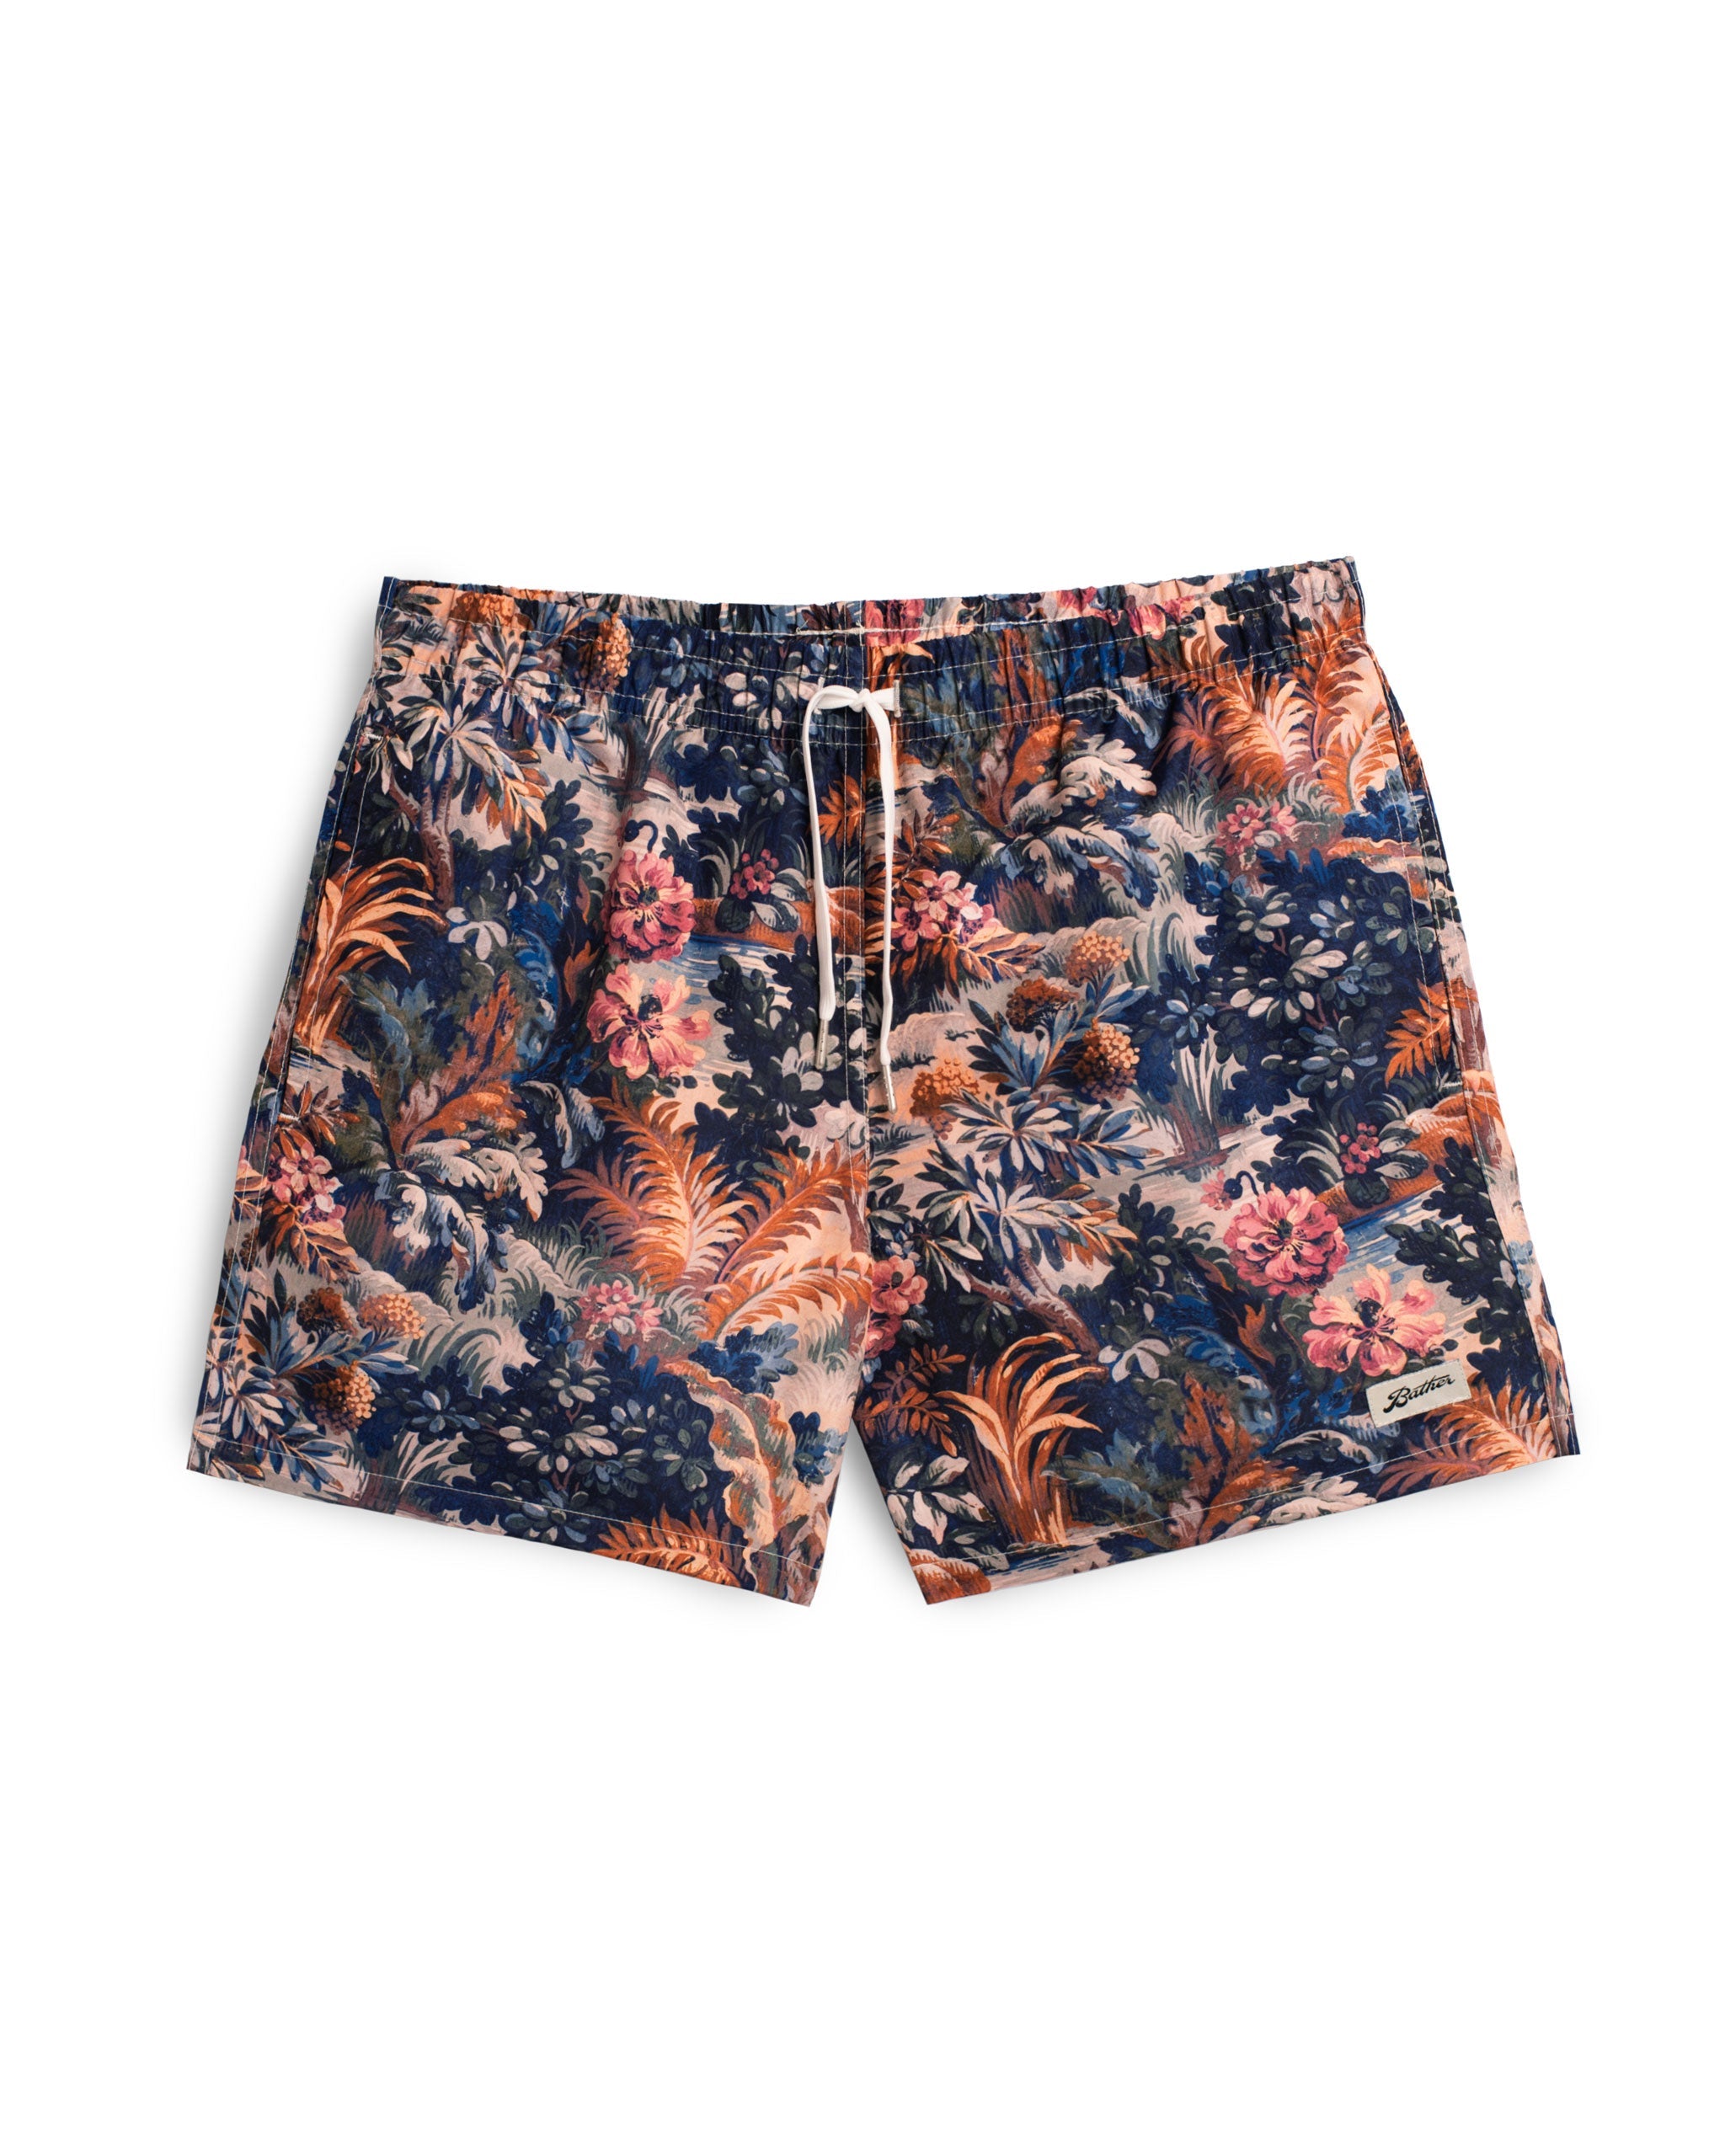 Bather swim trunk with forest pattern 